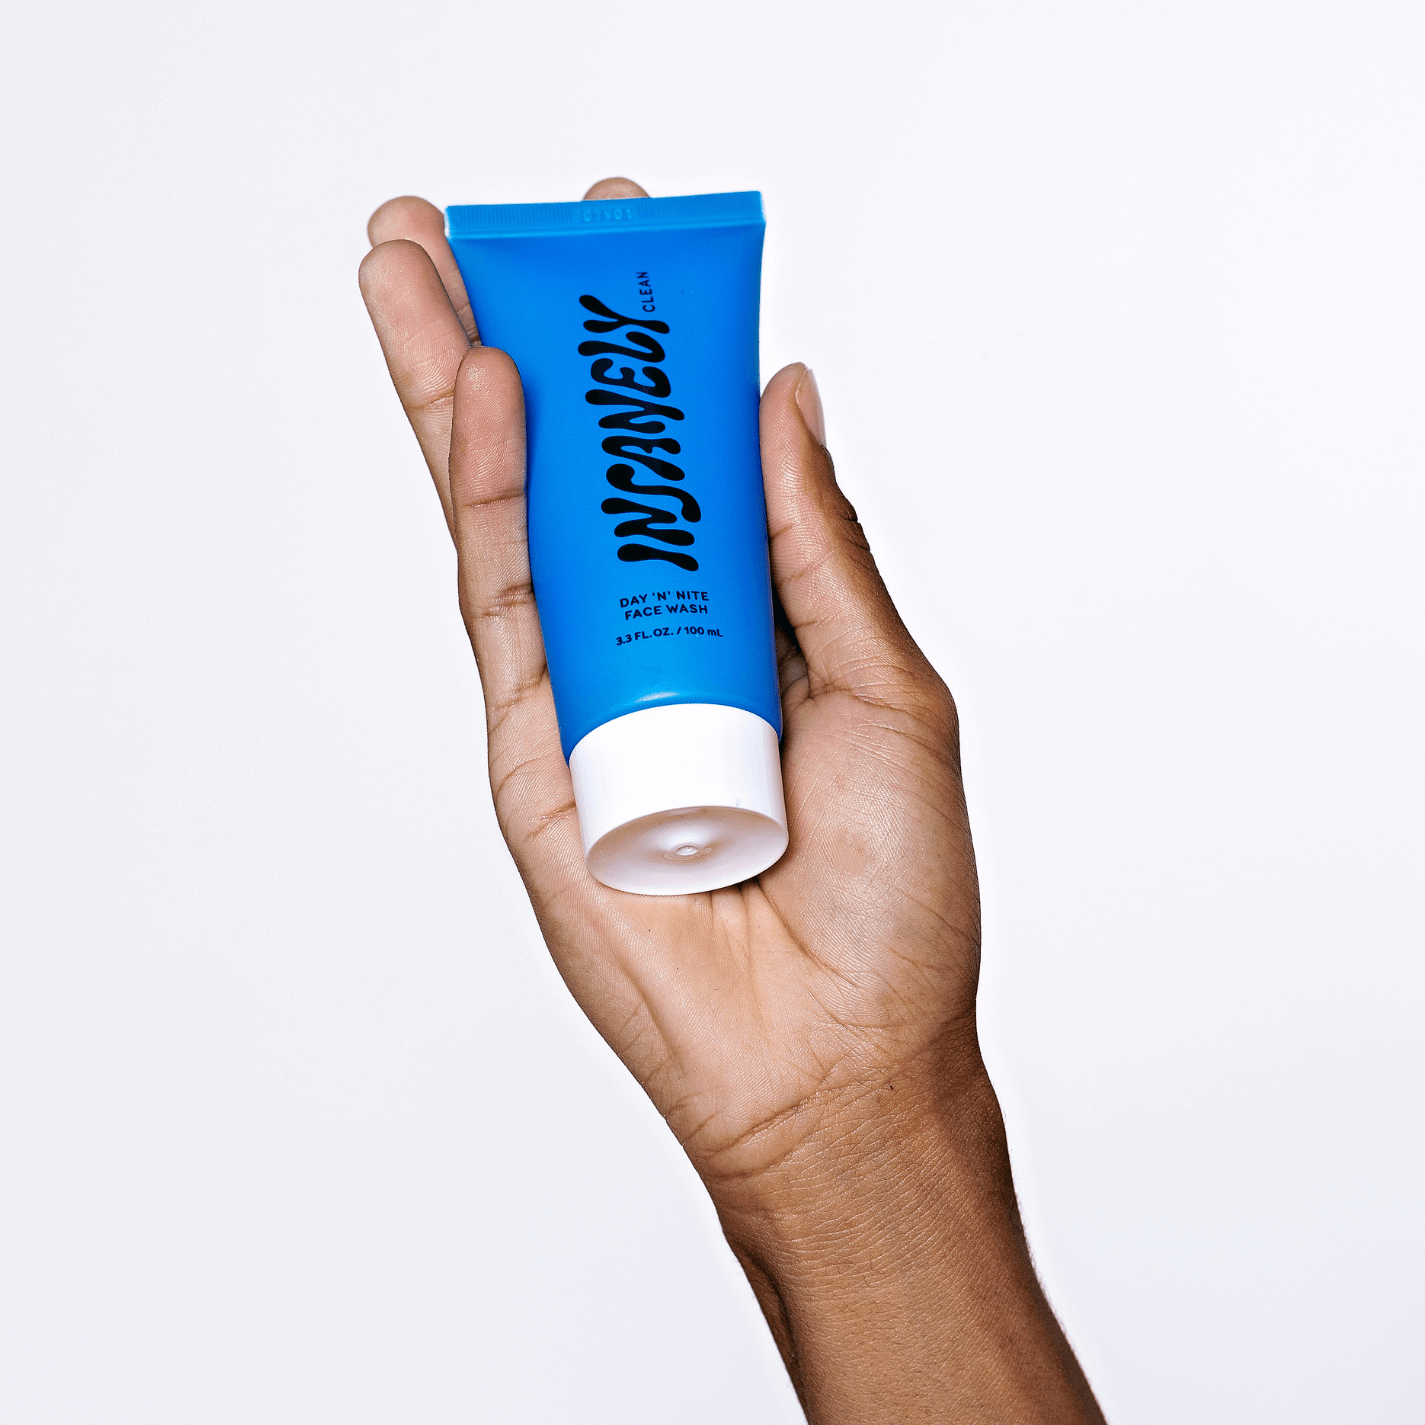 A hand displaying the best men's skincare product that is suitable for all skin types and is beard friendly.